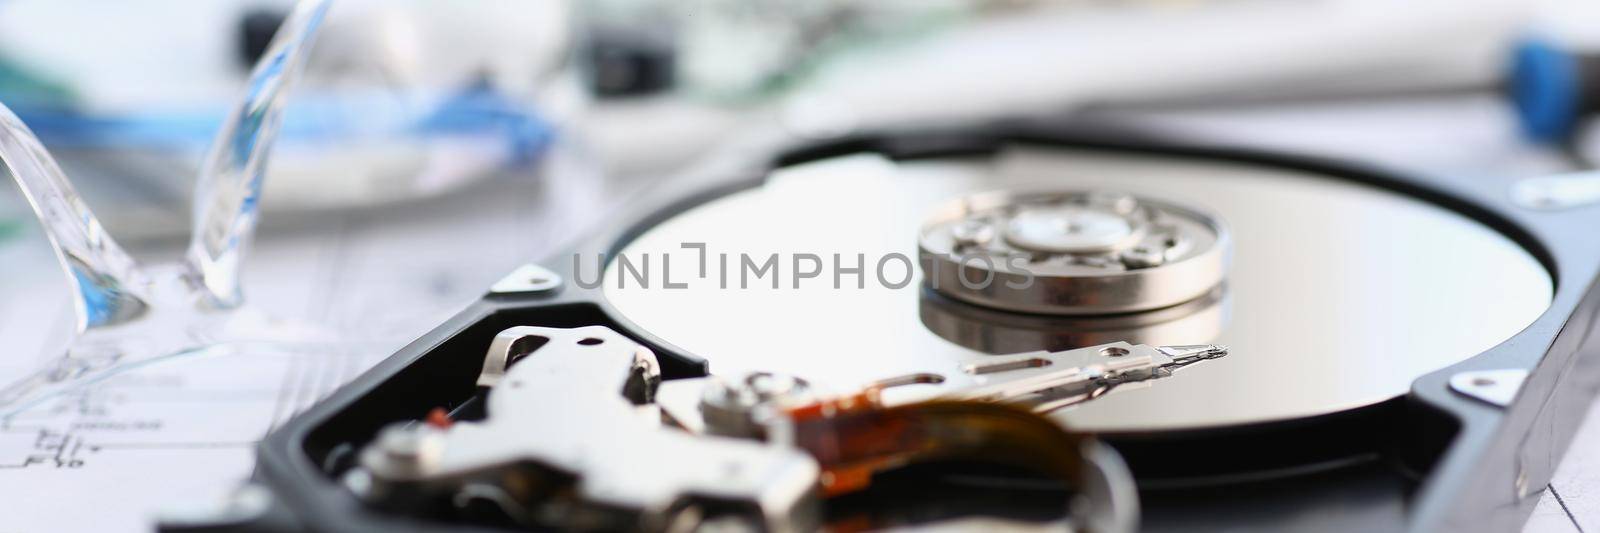 Disassembled hard drive from pc hdd and reader arm, made of plastic and metal by kuprevich